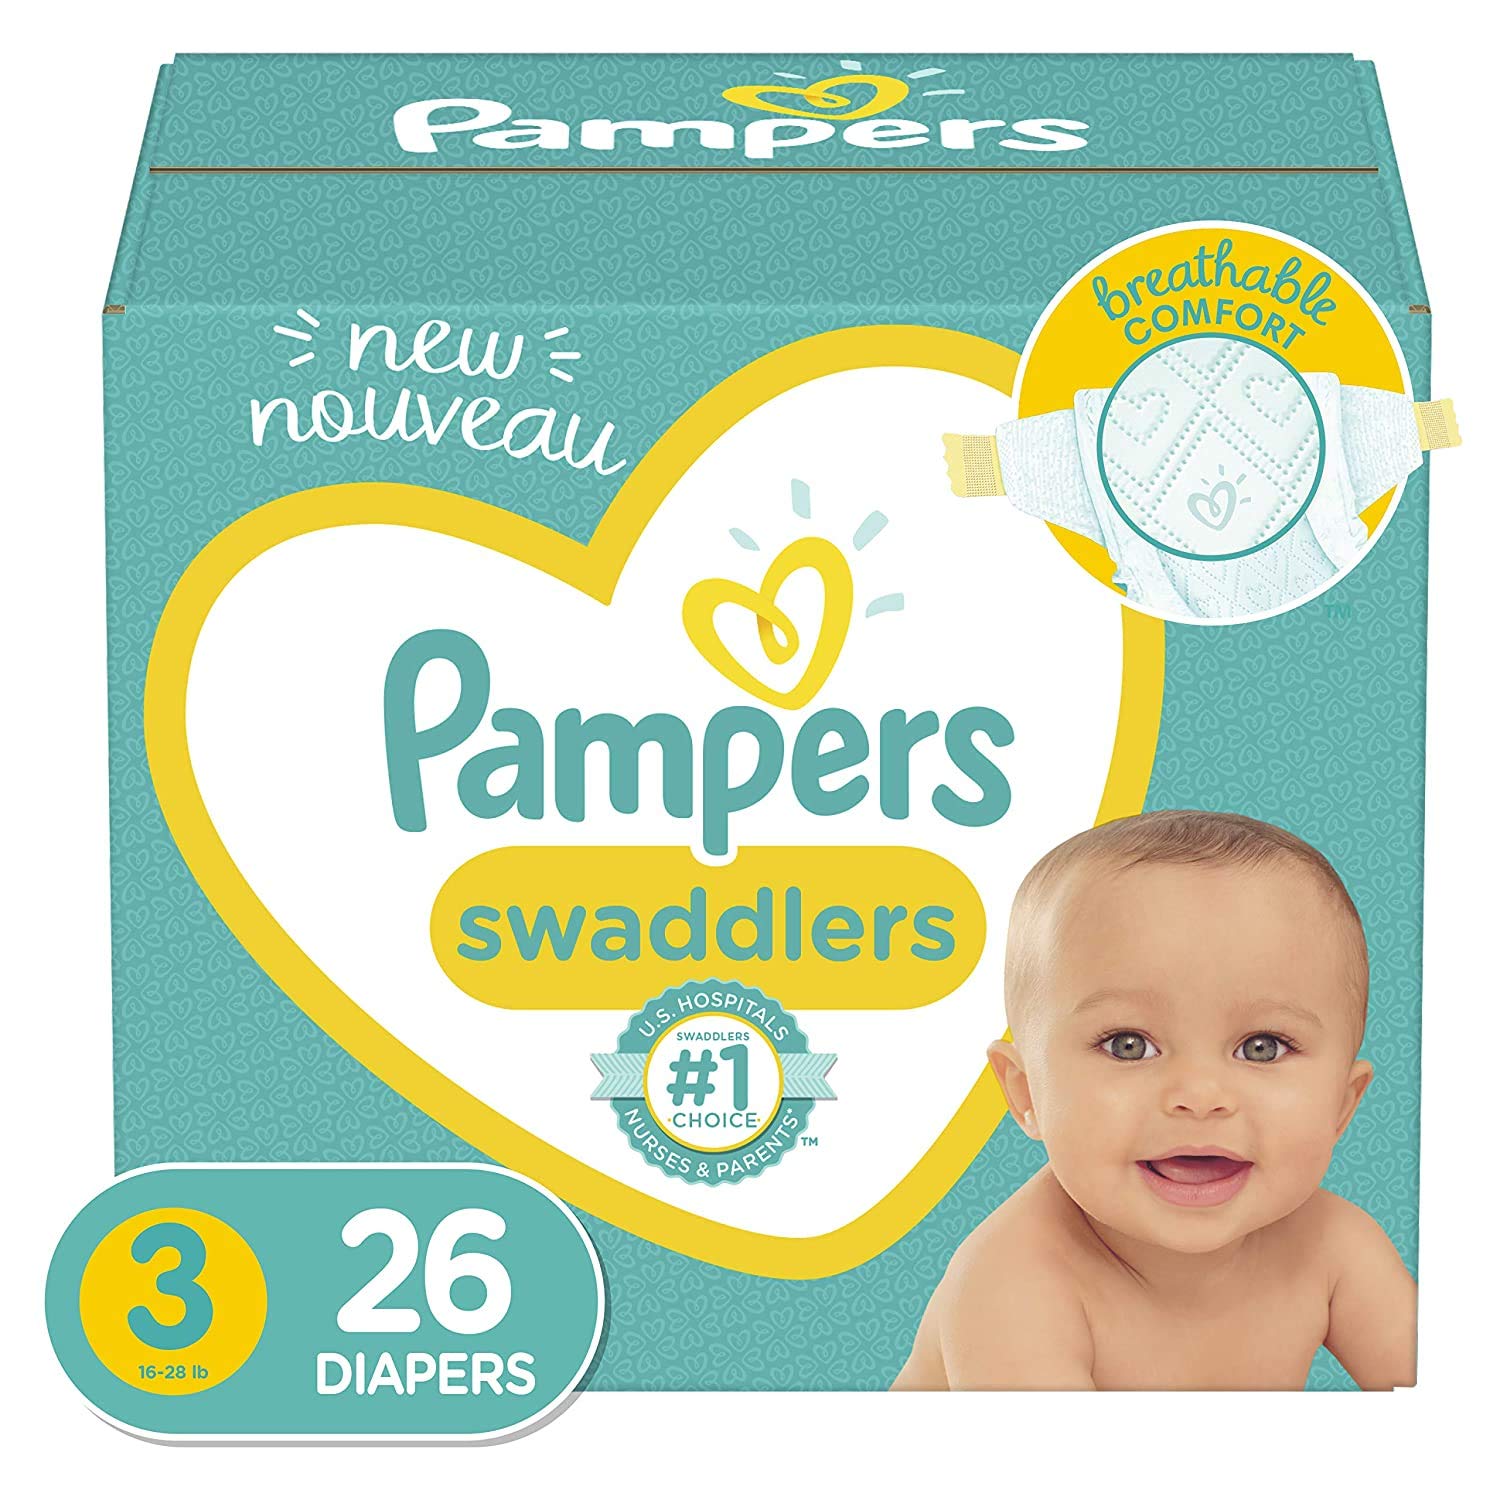 pampers swaddlers jumbo pack size 3